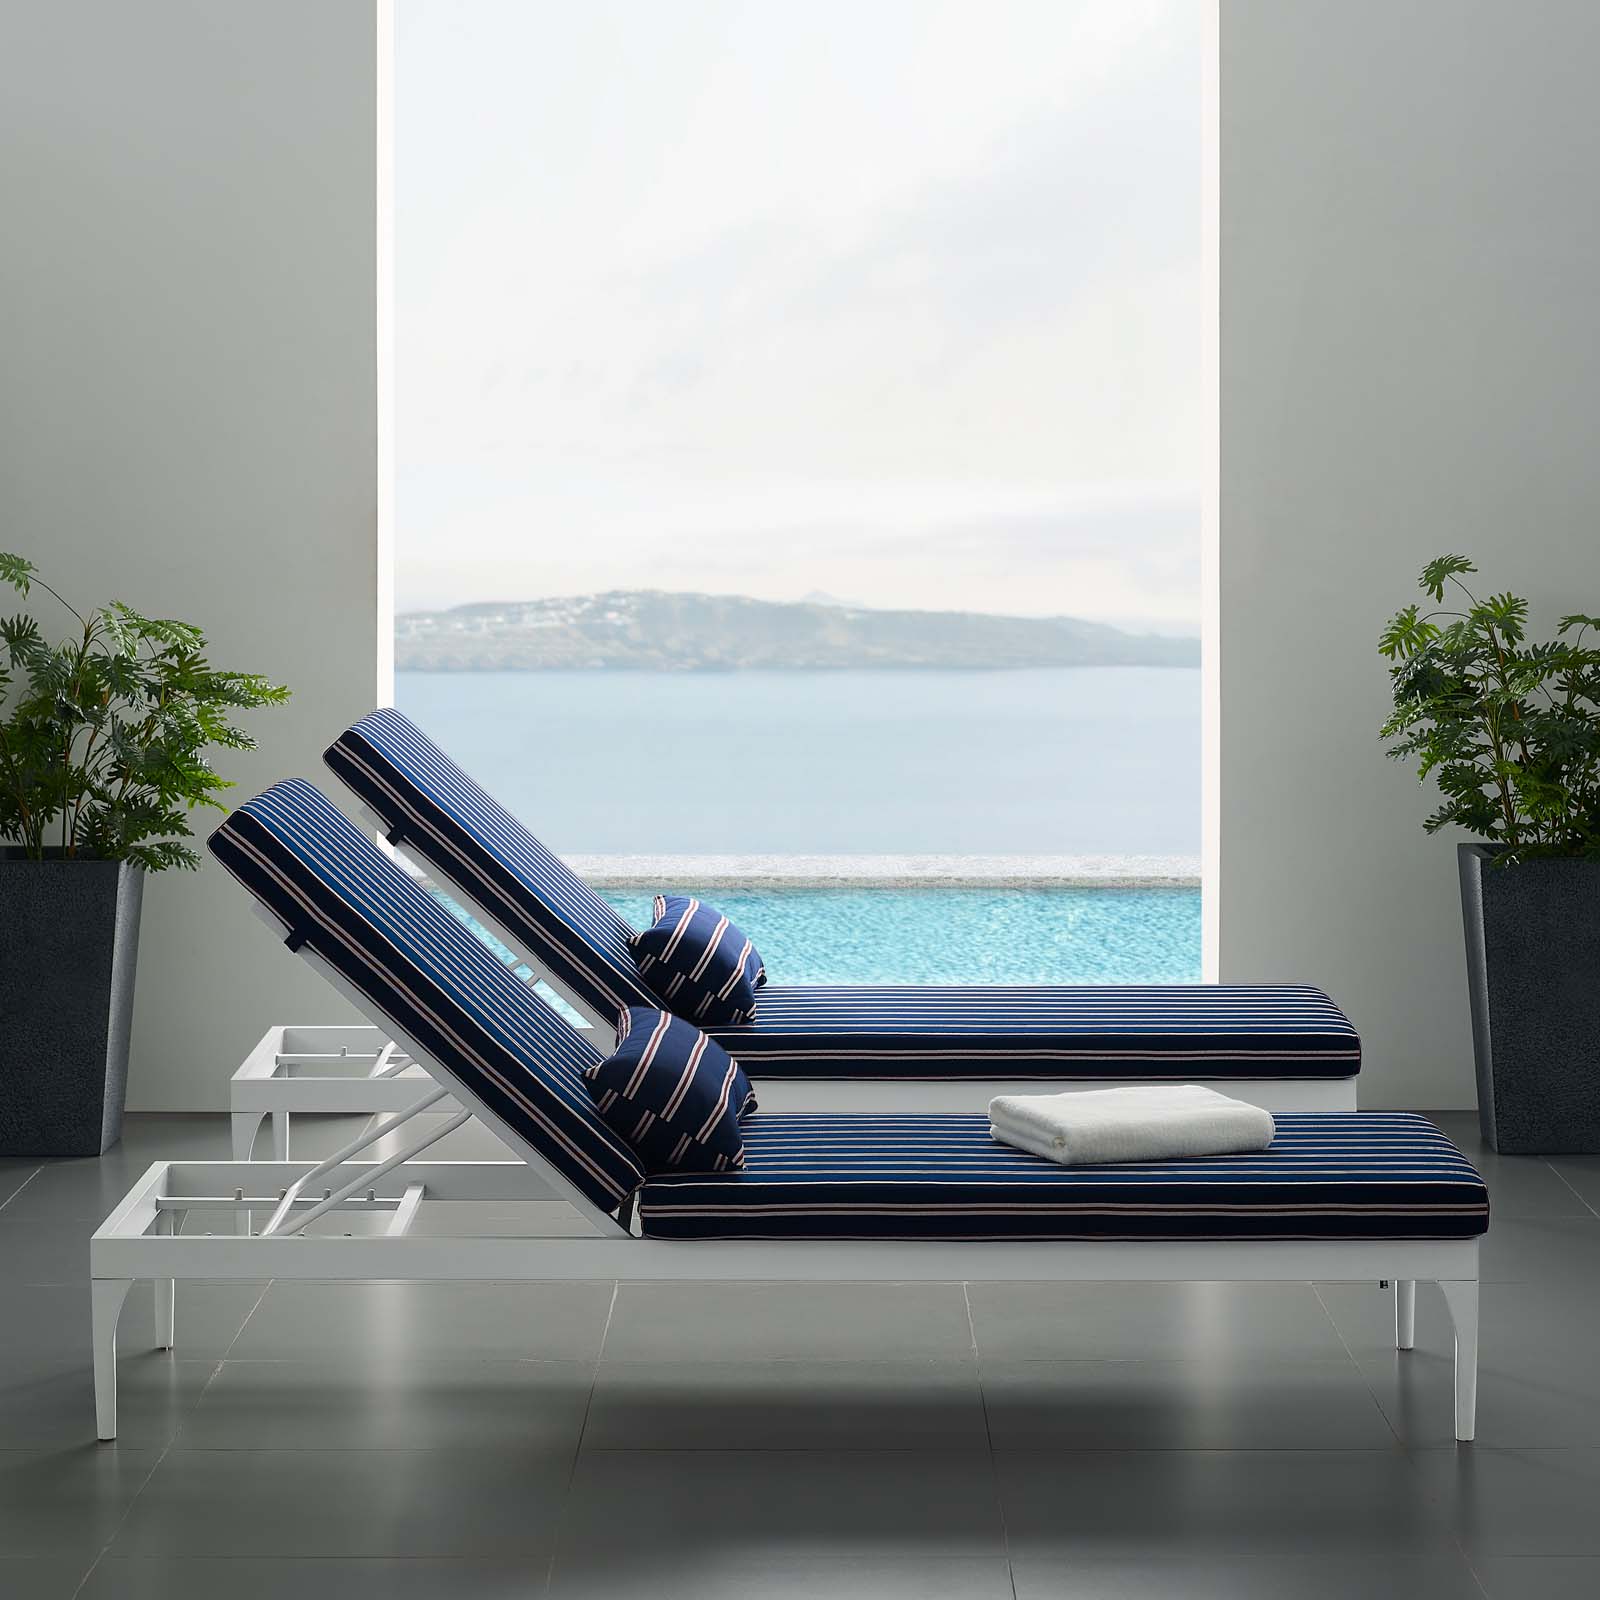 Modern Contemporary Urban Design Outdoor Patio Balcony Garden Furniture Lounge Chair Chaise, Fabric Metal Steel, White Navy - image 2 of 7